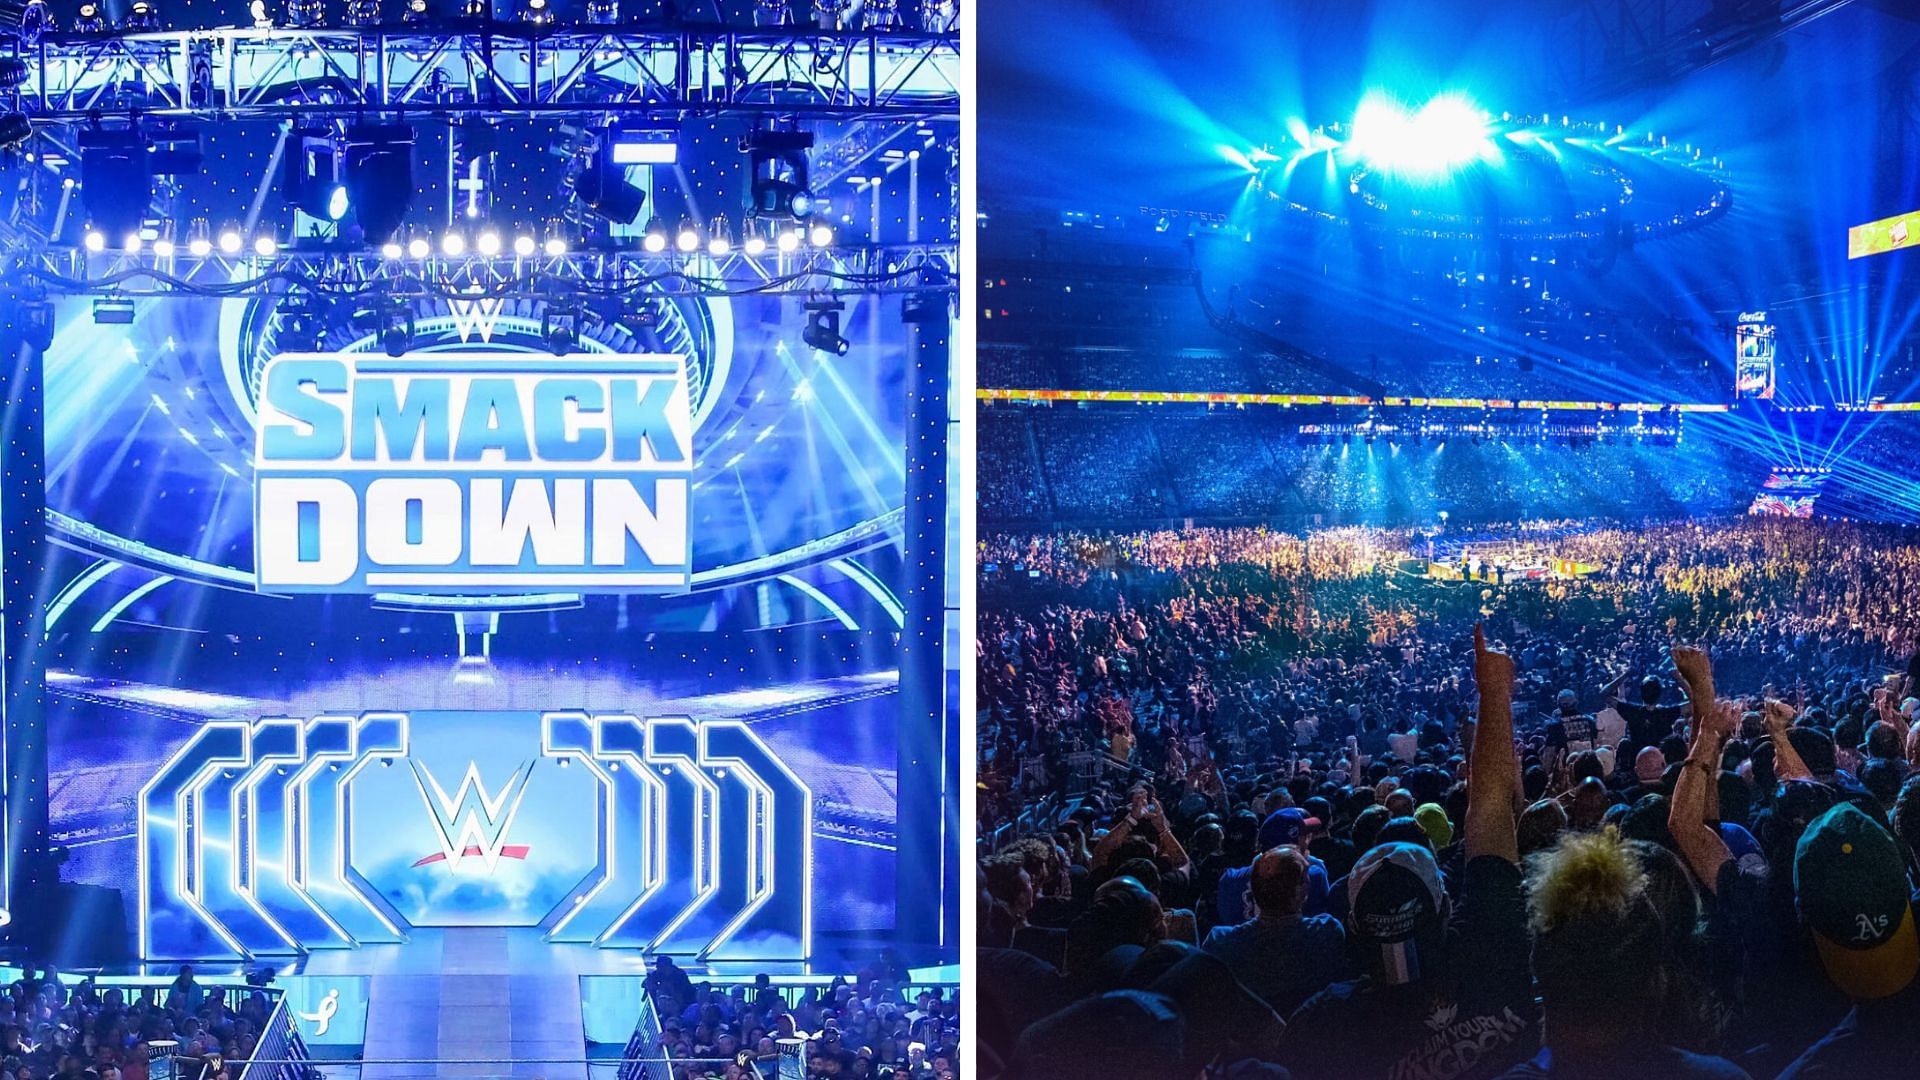 SmackDown Airs on Friday nights on the USA network